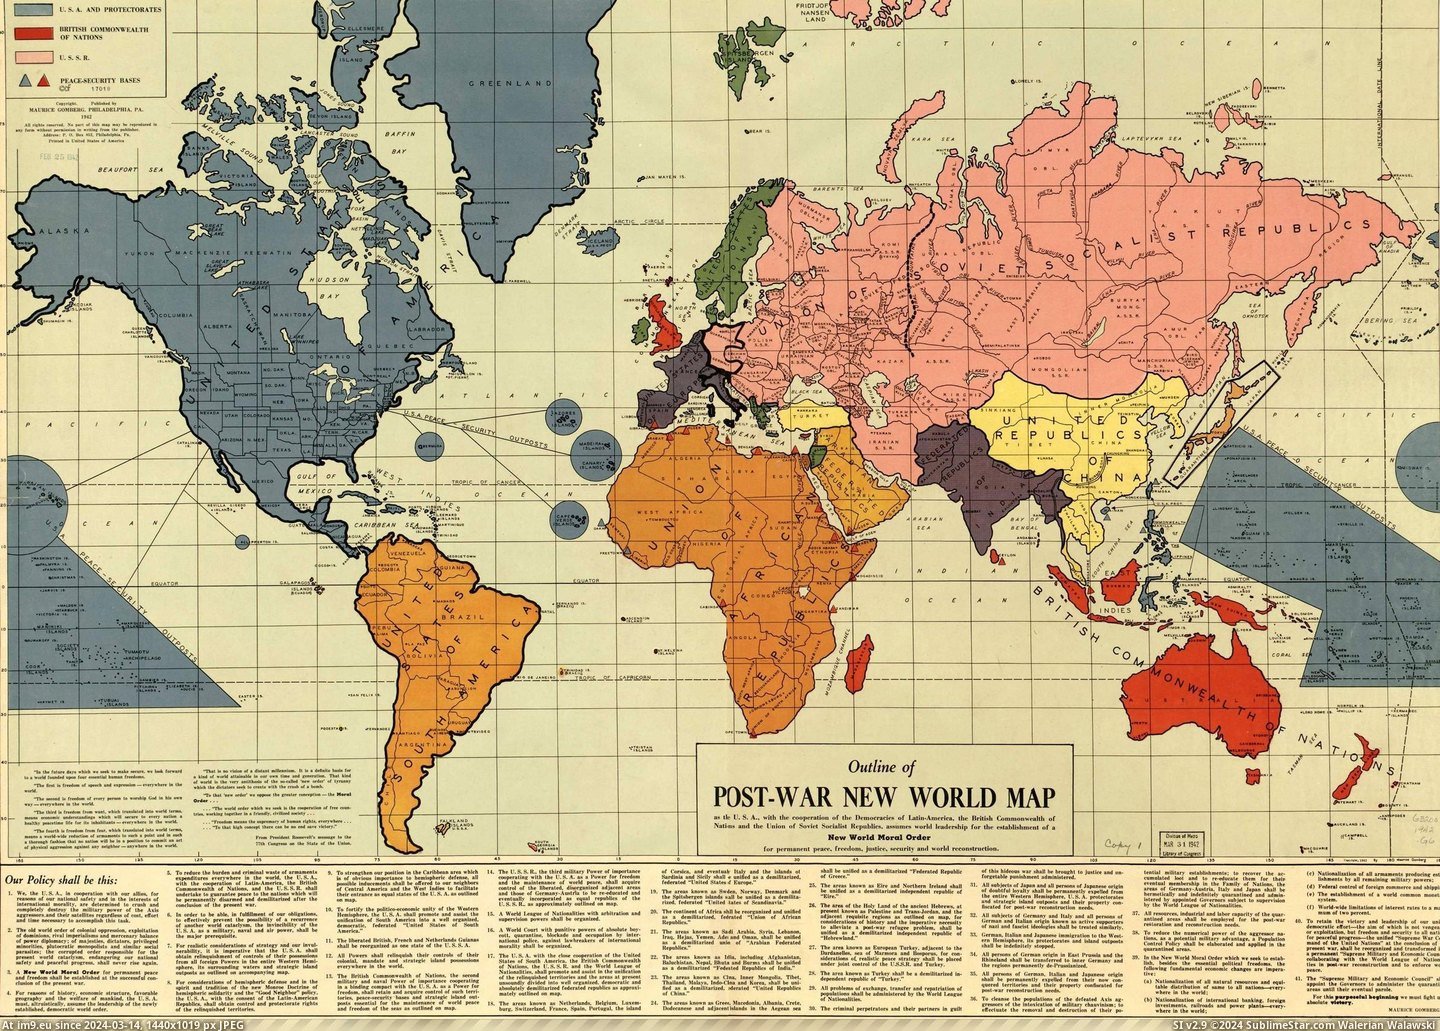 #World #Map #War #Order #Moral #Shortly #Maurice #Gomberg #Pearl #Constructed #Infamous #Harbour [Mapporn] Infamous map of the 'Post-War New World Moral Order' constructed shortly before Pearl Harbour by Maurice Gomberg [3972 Pic. (Image of album My r/MAPS favs))